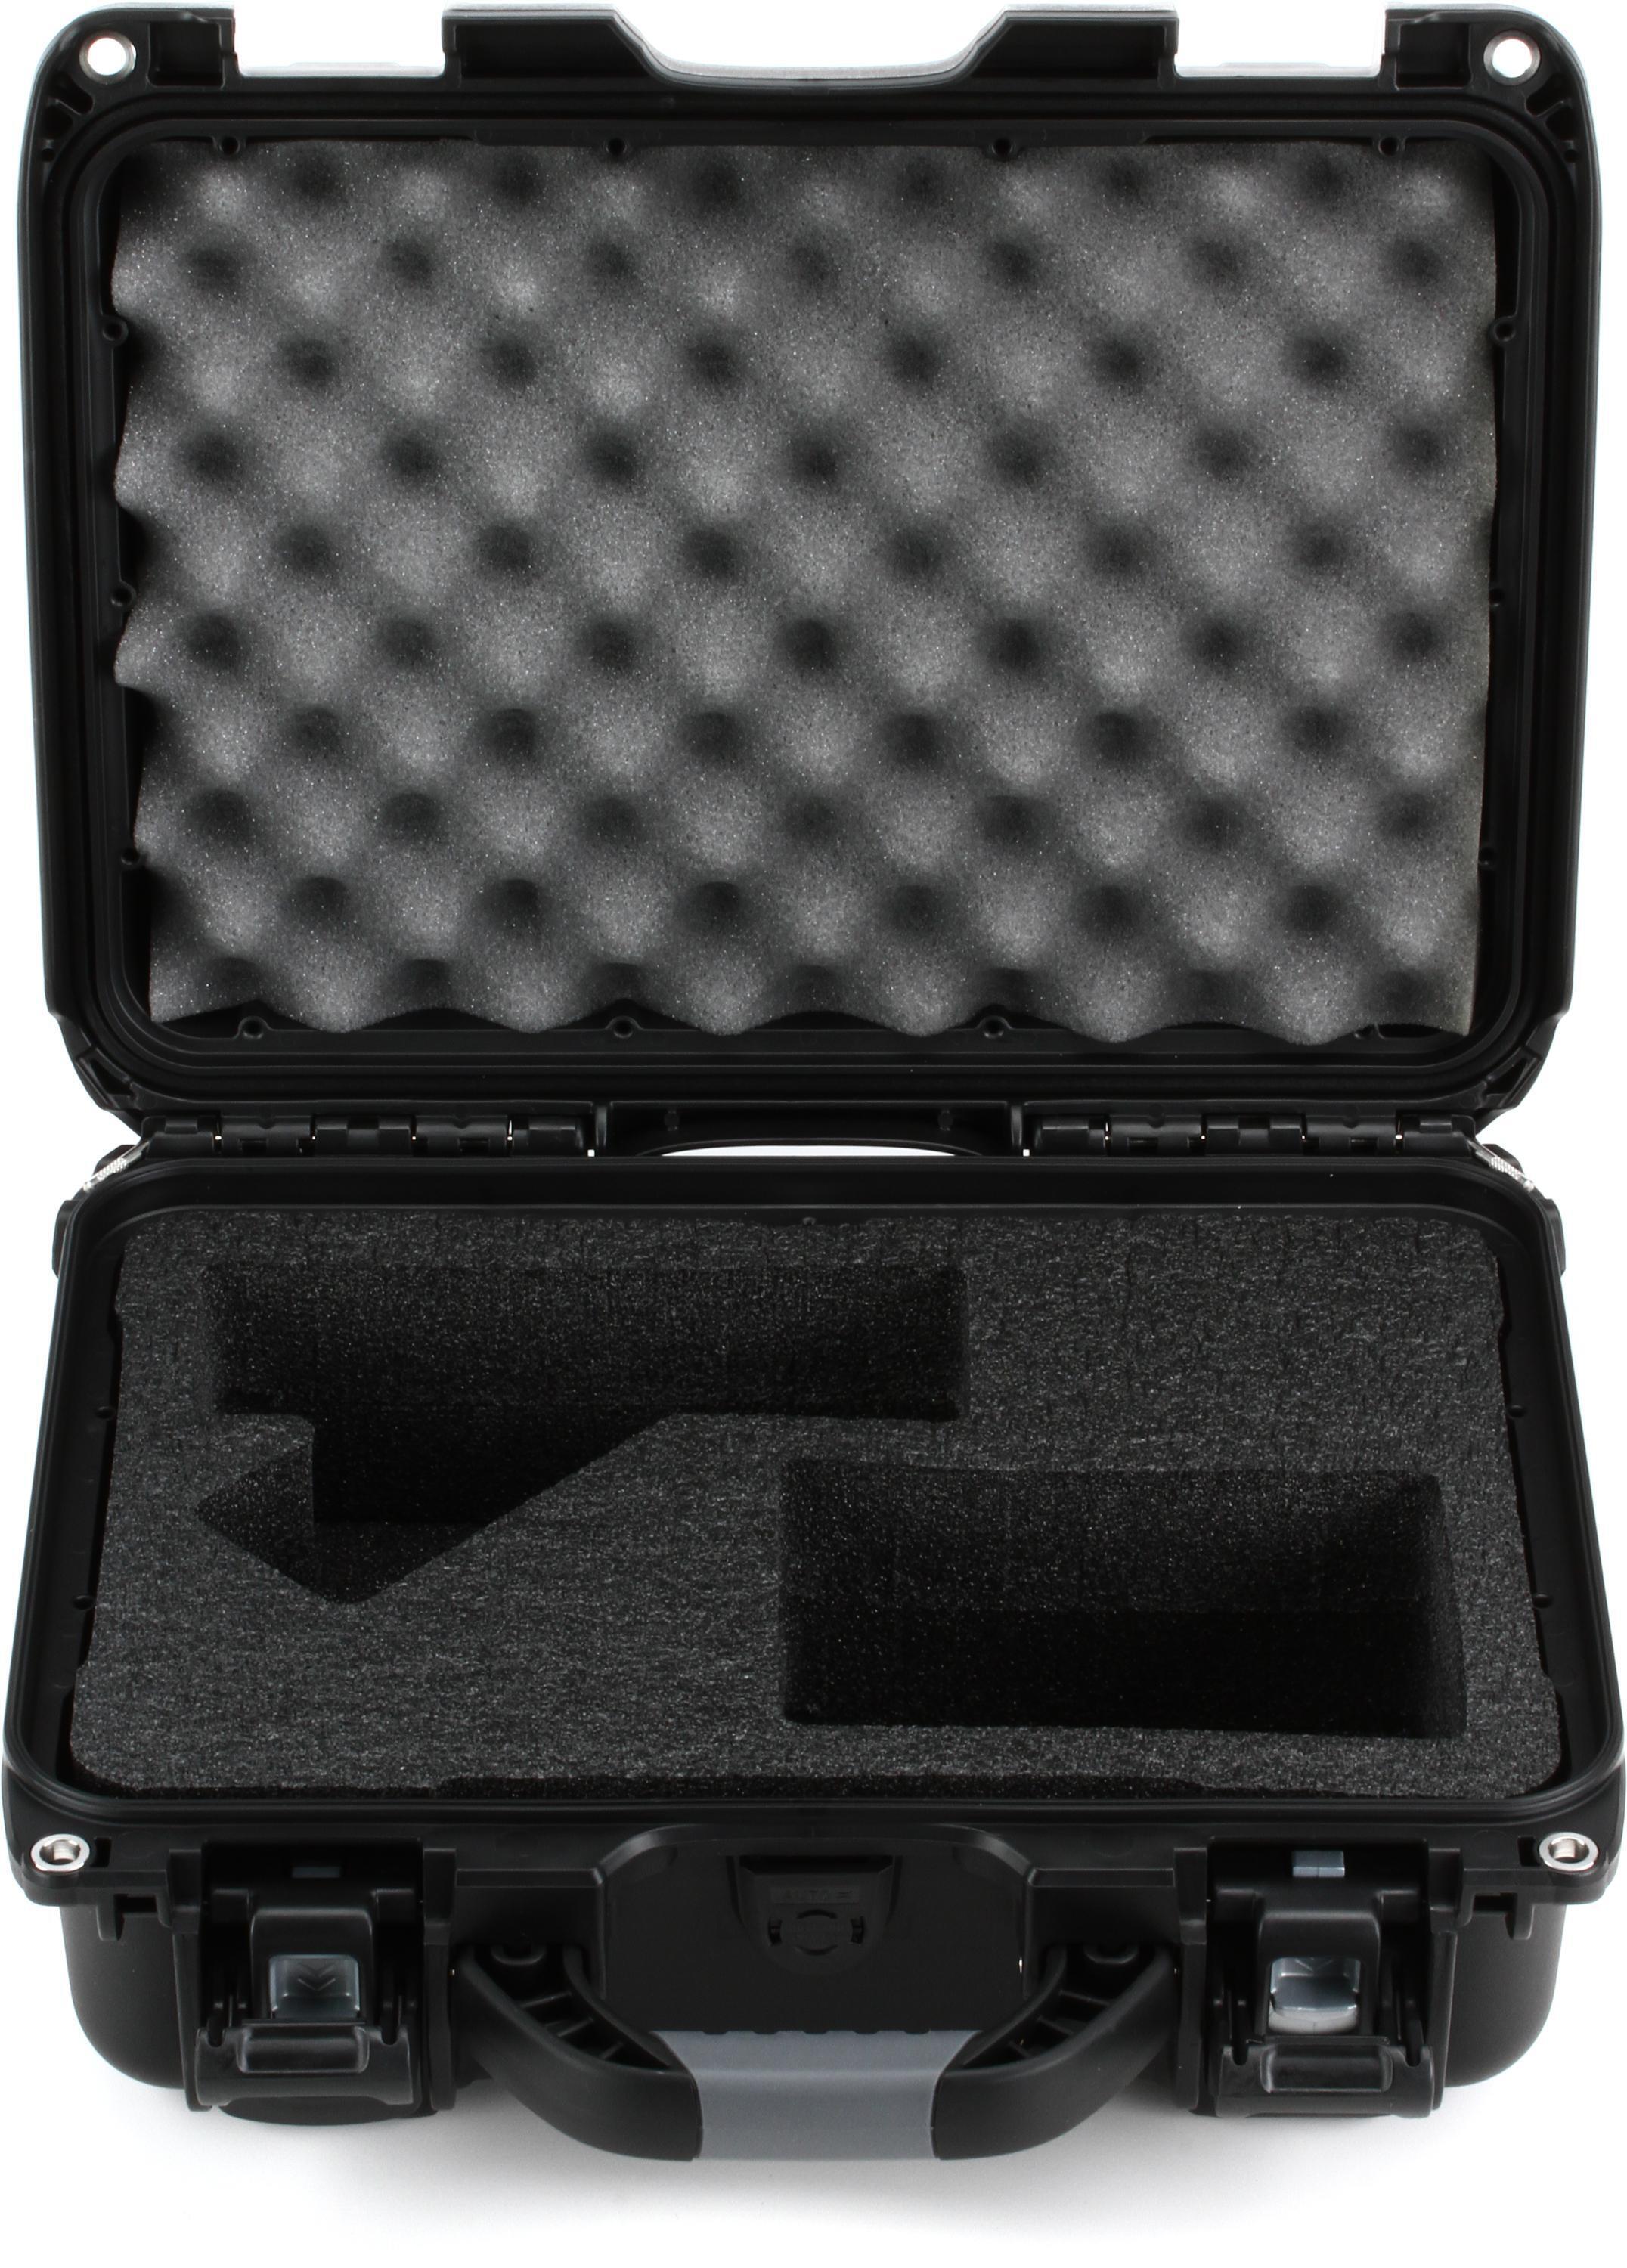 Shure SM7B Dynamic Microphone Bundle with Case and Cable | Sweetwater